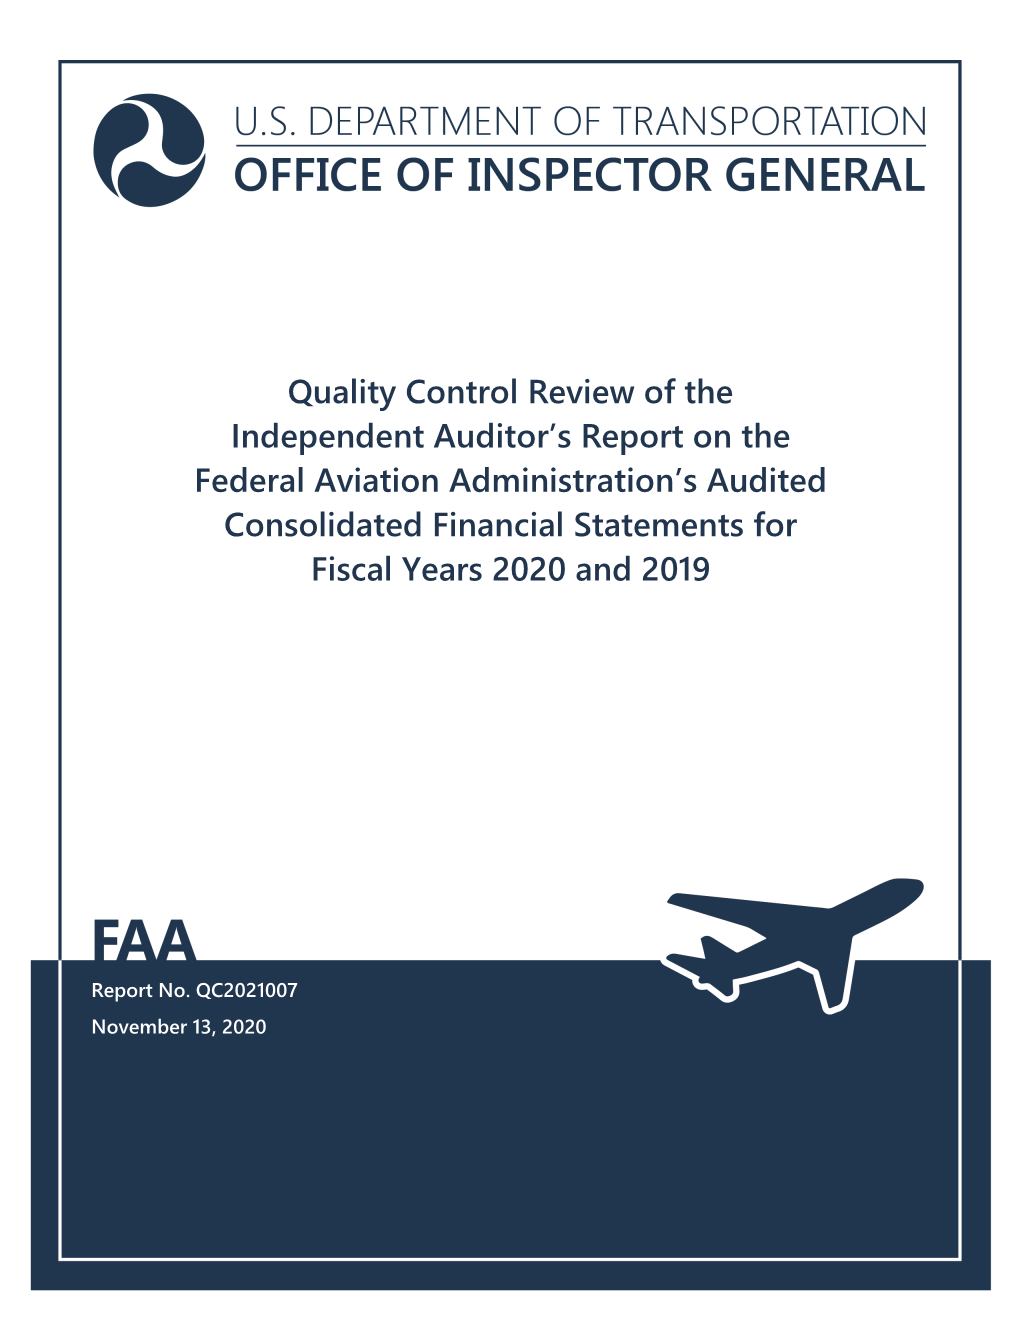 Quality Control Review of the Independent Auditor's Report On